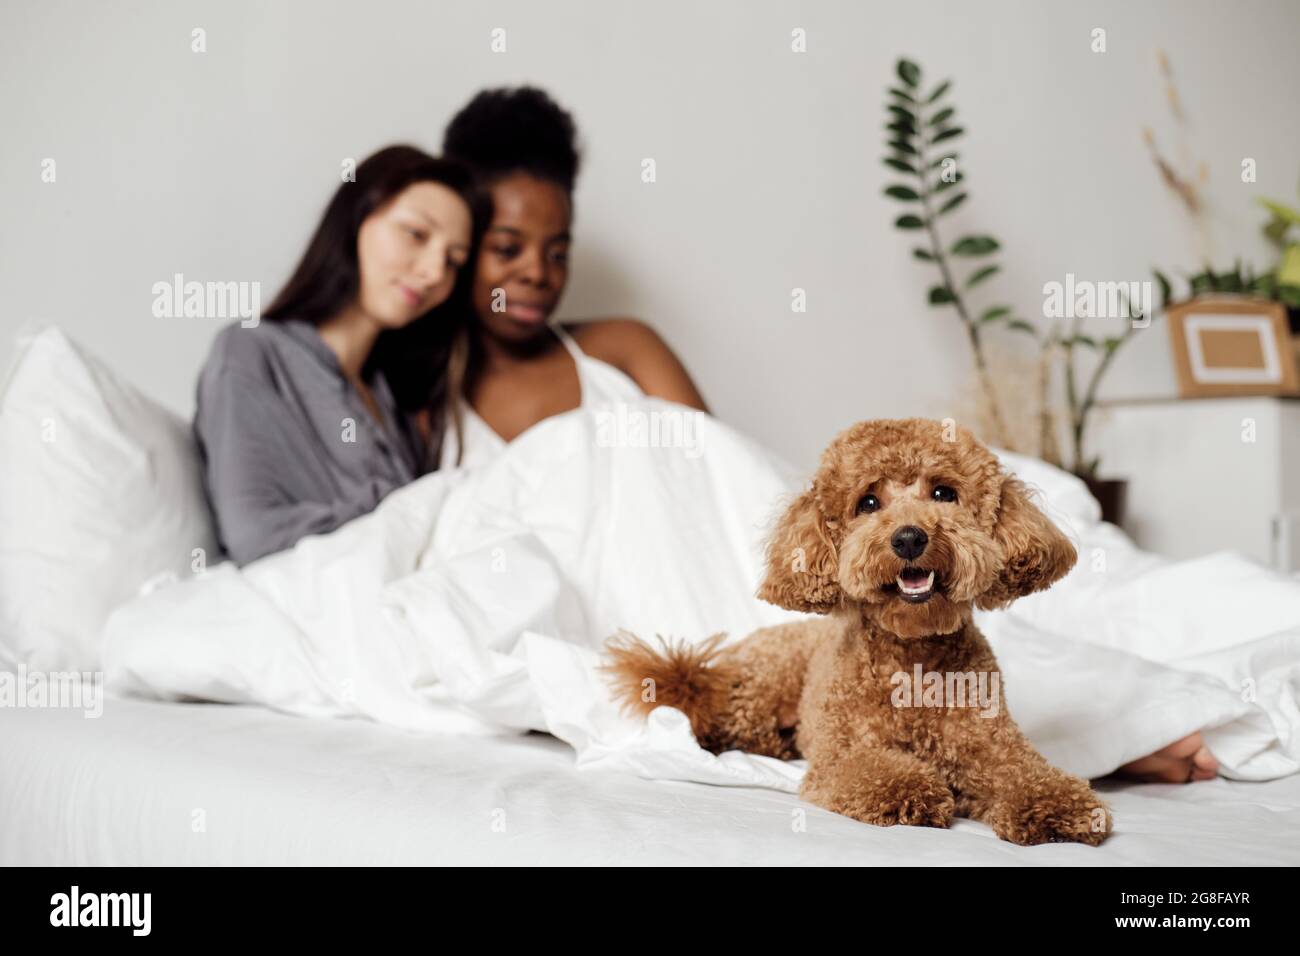 Cute dog lying on bed against two intercultural girls Stock Photo